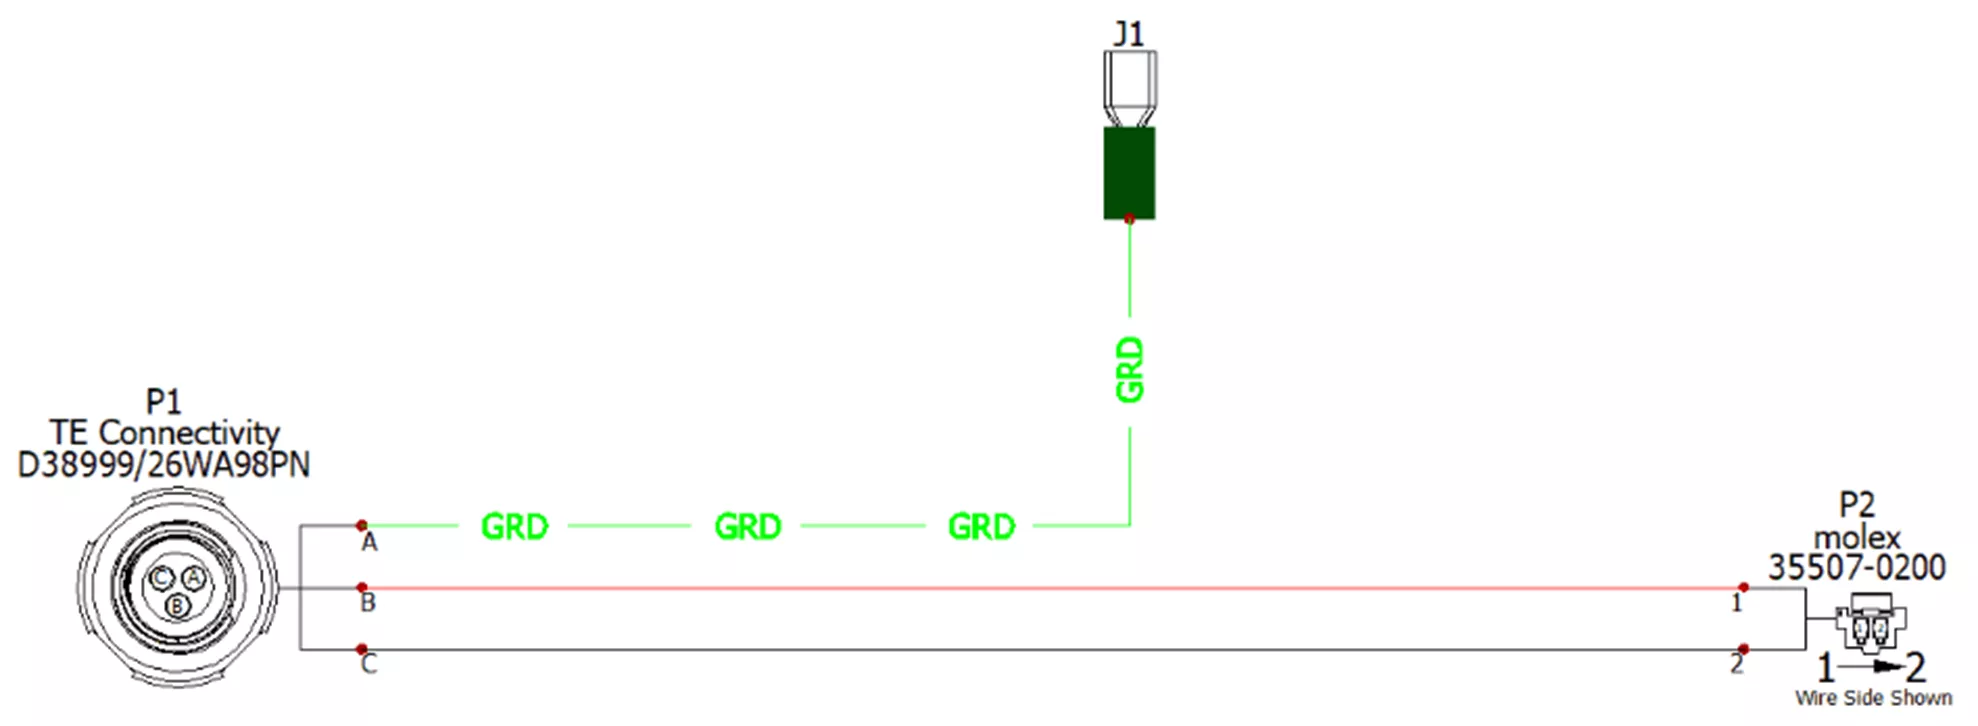 How to Create Custom Line Types in SOLIDWORKS Electrical Schematic/2D